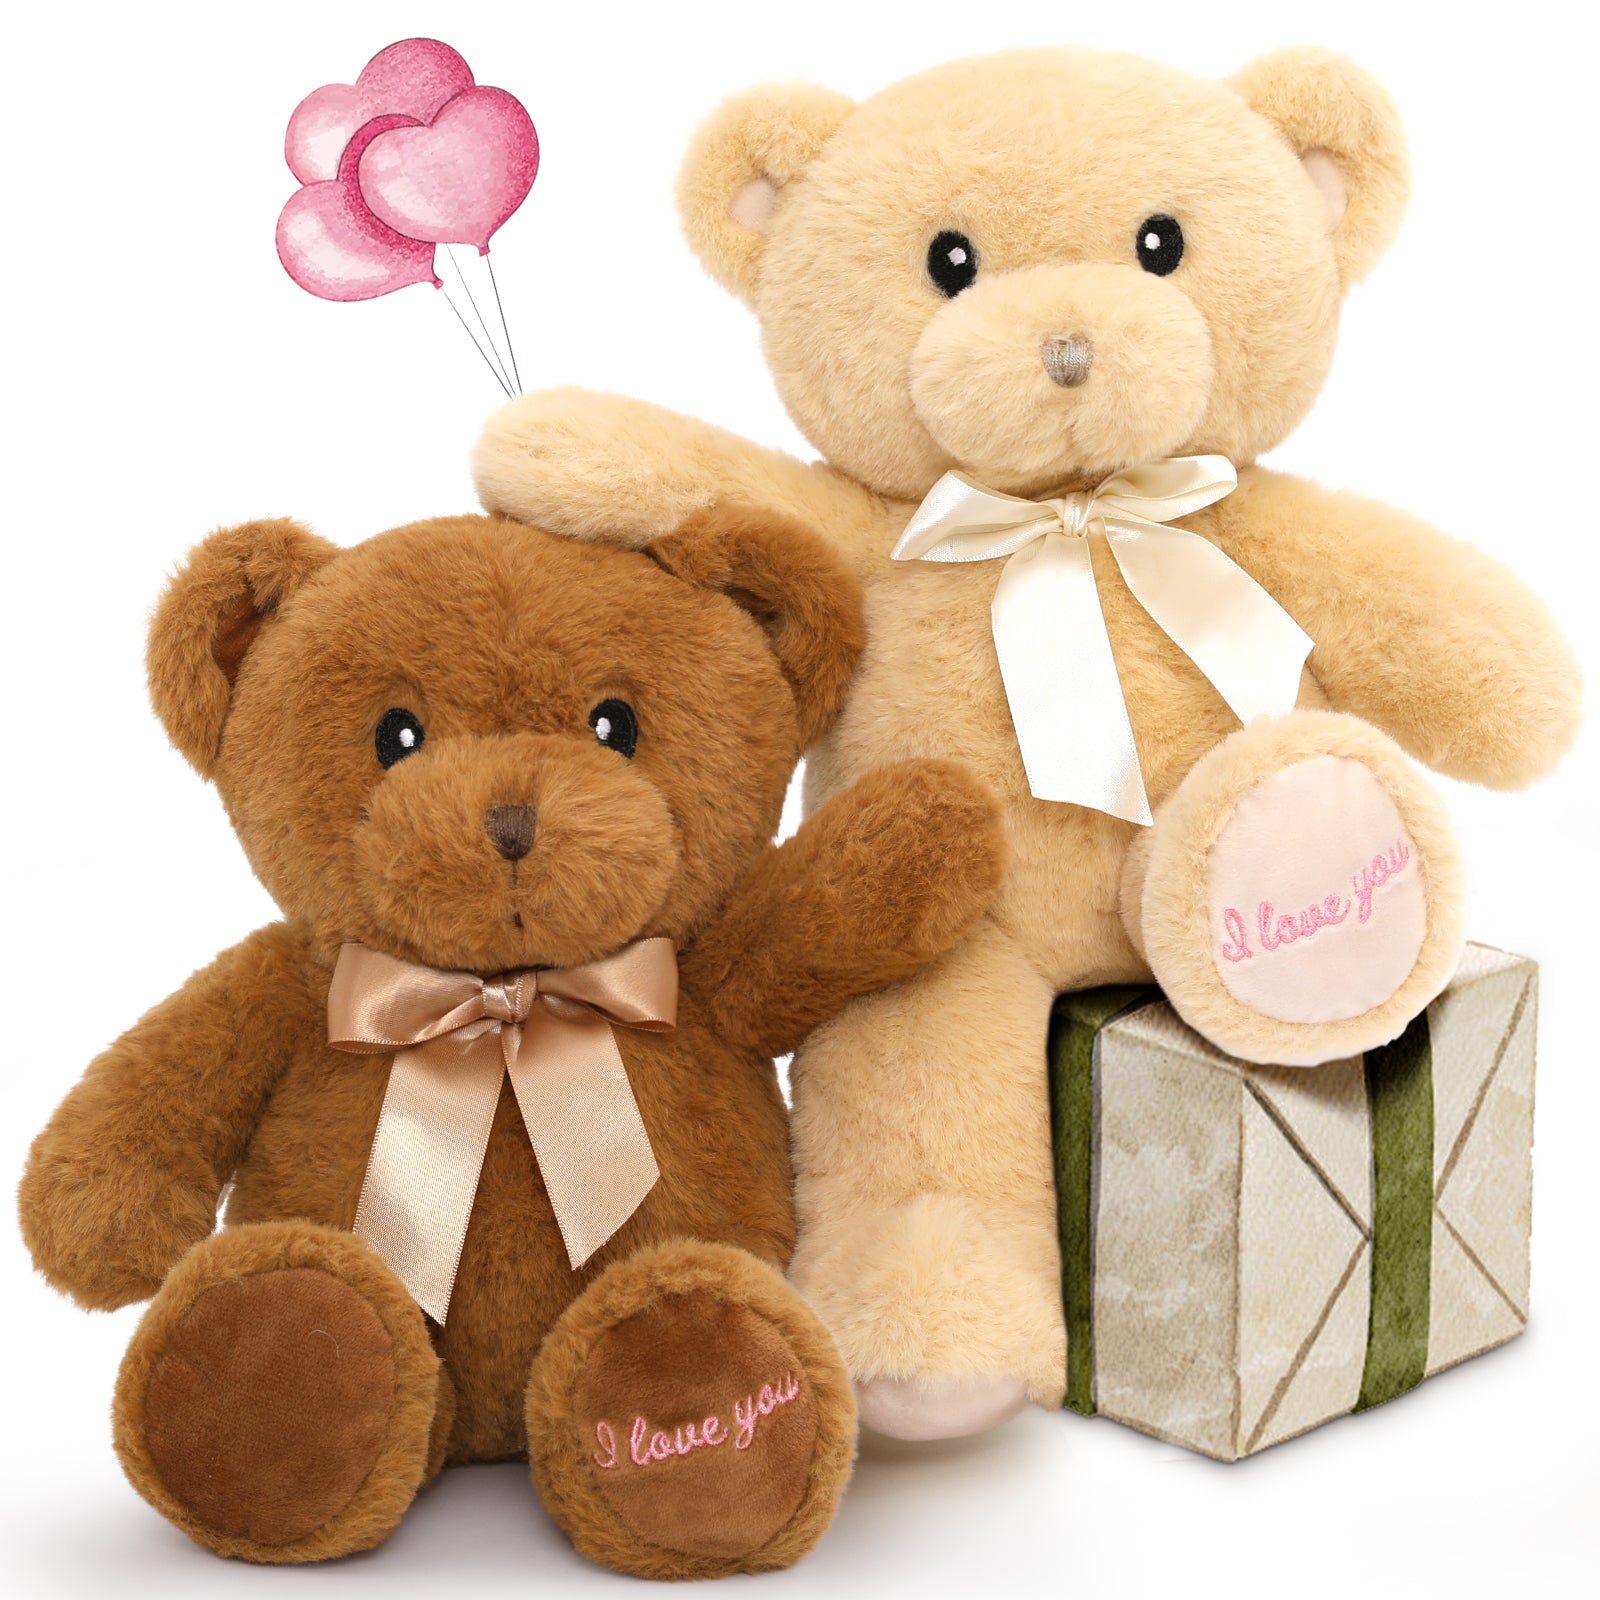 2 Packs of Teddy Bear Stuffed Animal Toy Set, 12 Inches